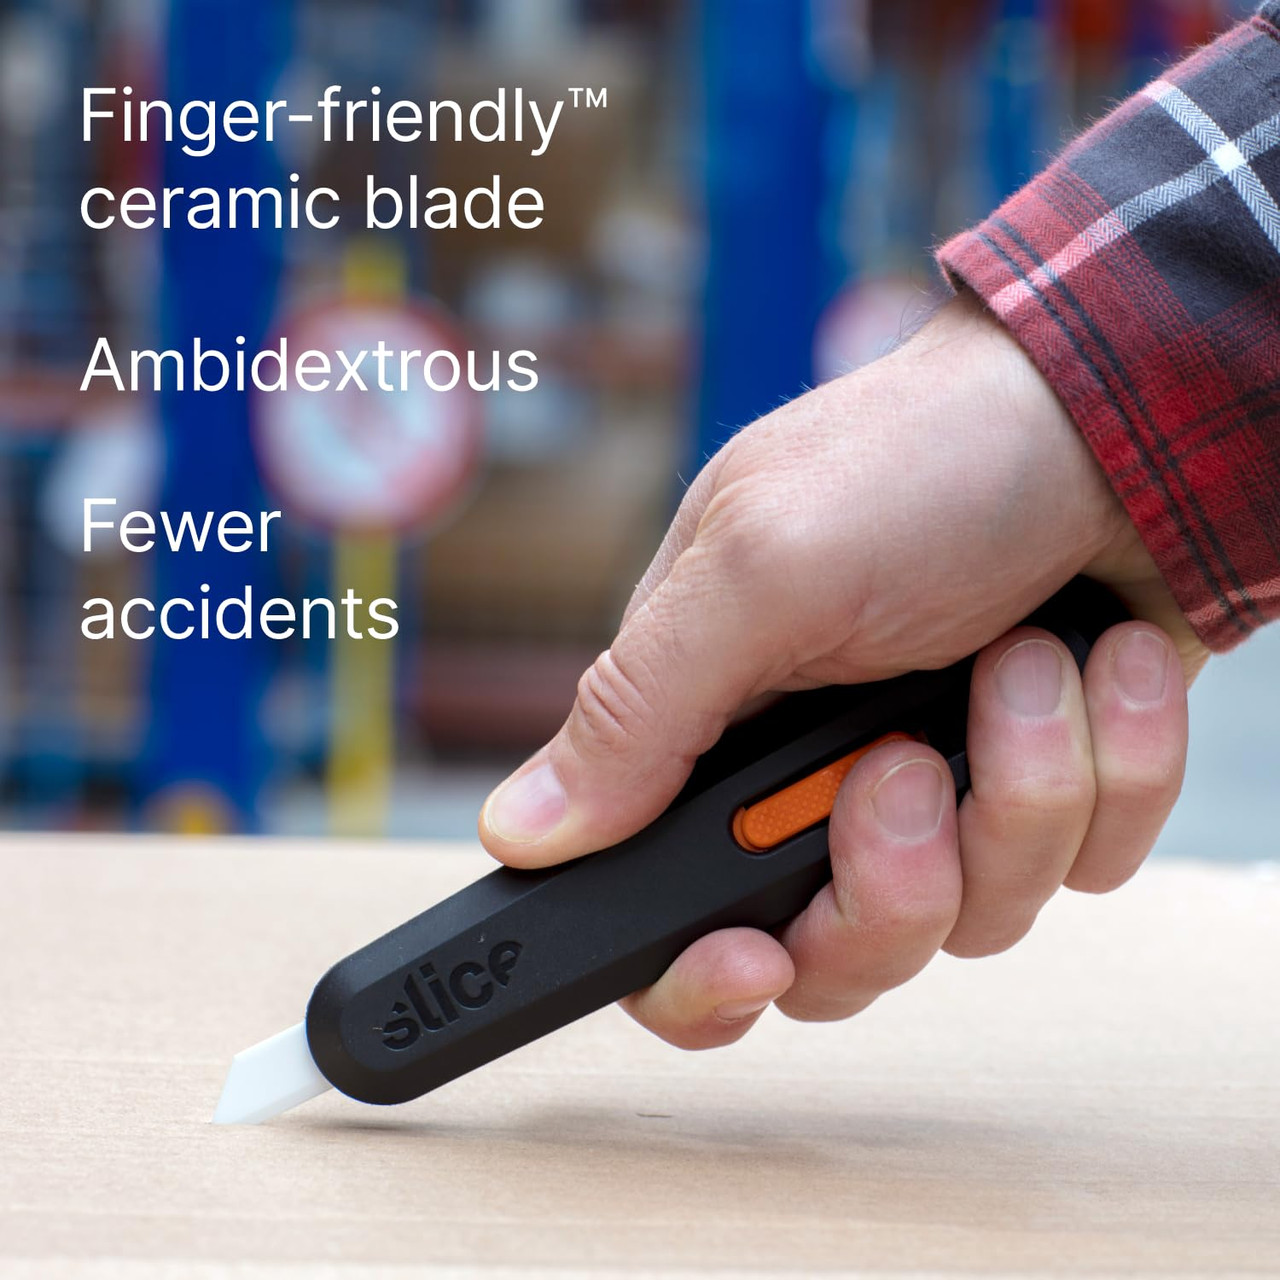 Slice Box Cutter, 3 Position Manual Button With Ceramic Blade (10400)